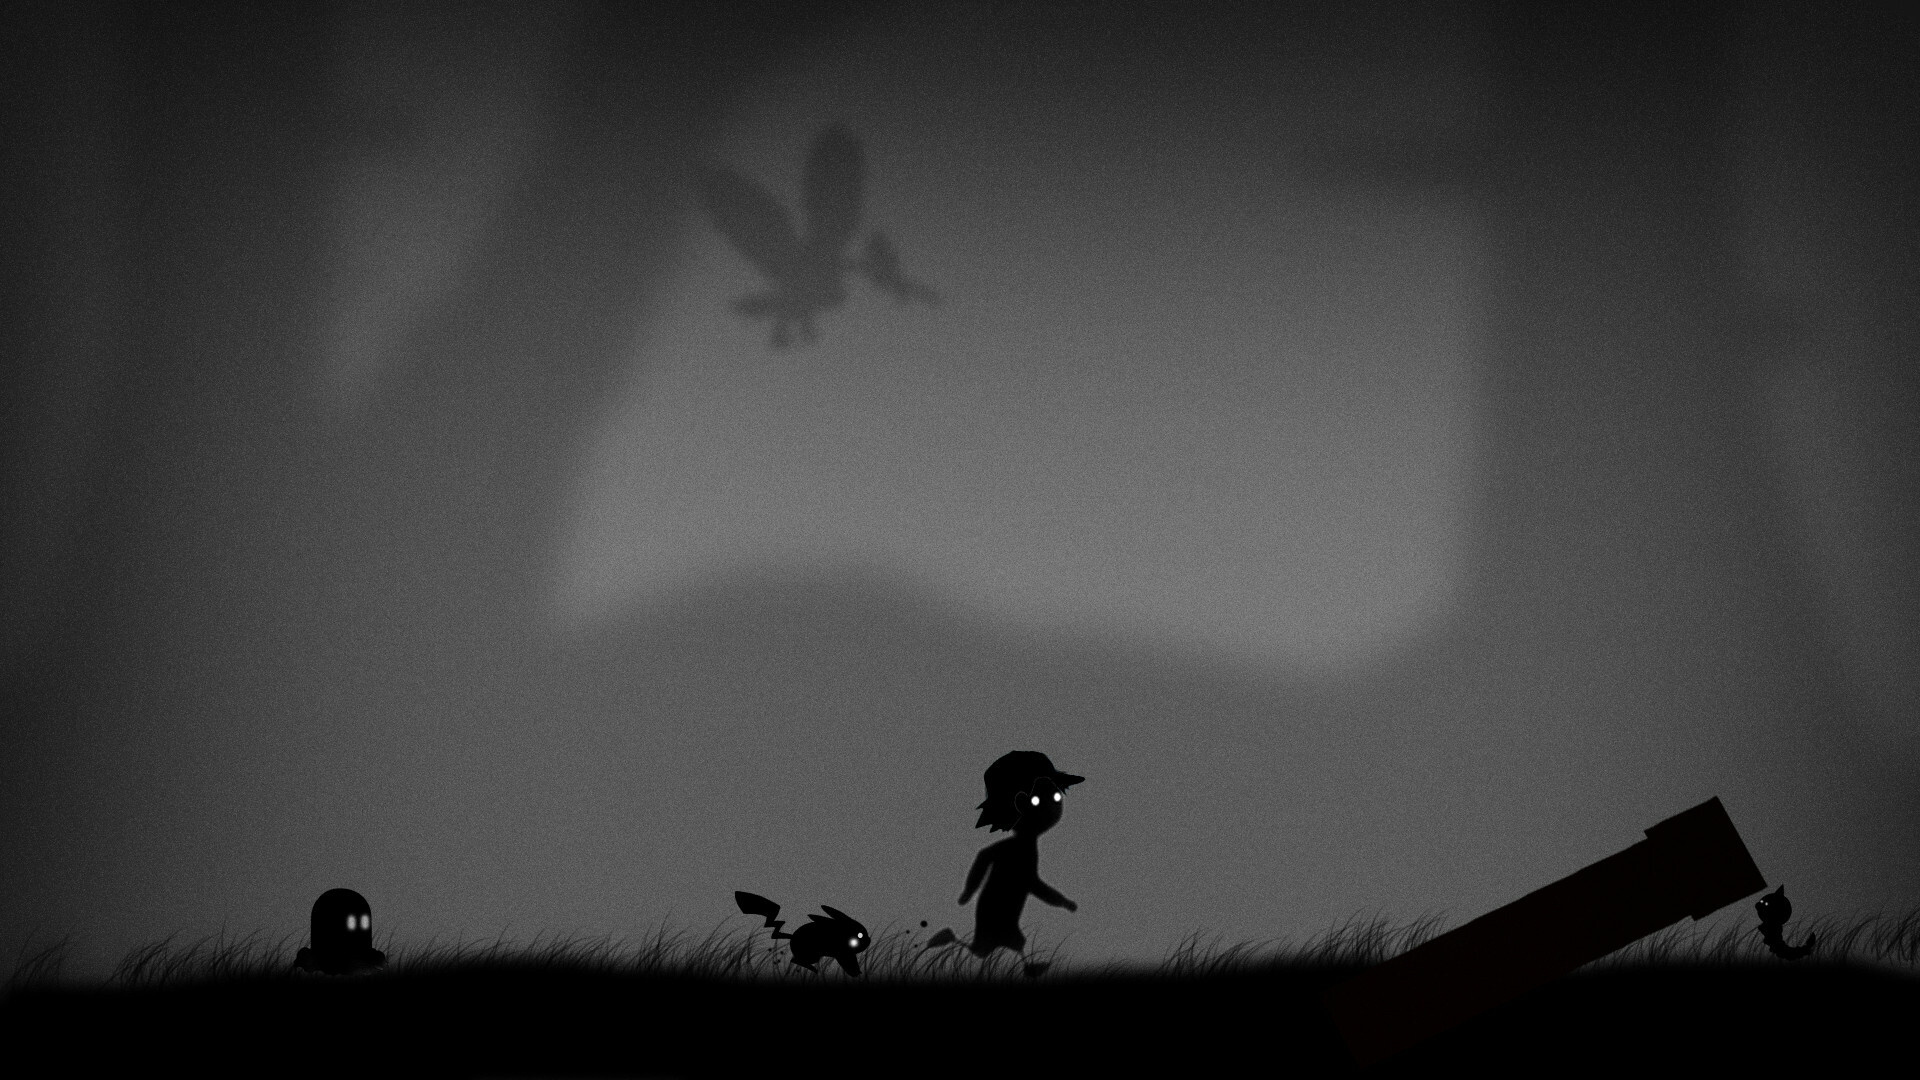 Limbo: It's able to display so much with just black, white, and shades of gray, 2D, Puzzle platformer. 1920x1080 Full HD Wallpaper.